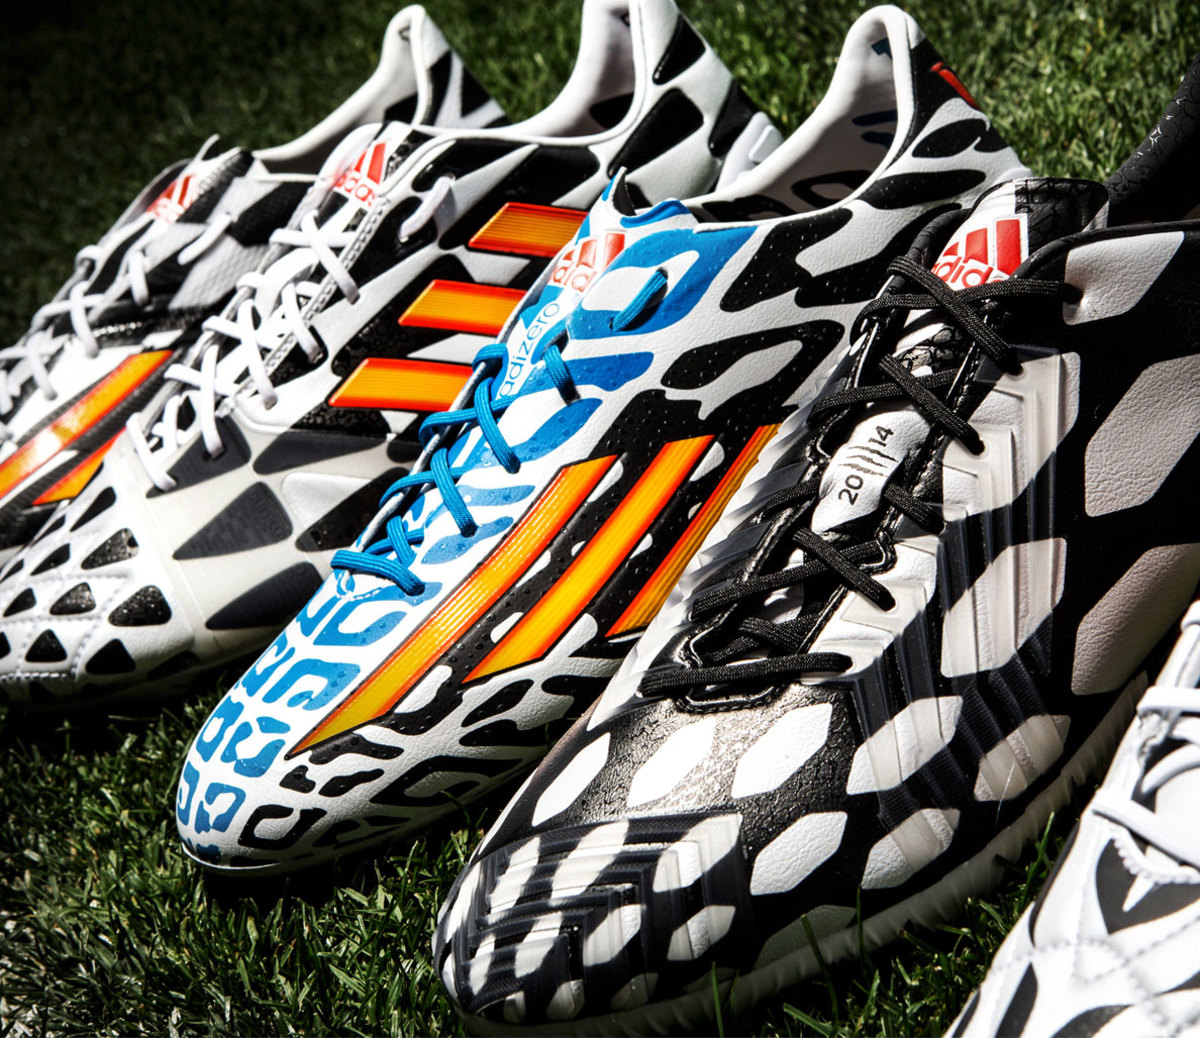 New Adidas 2014 World Cup Cleats Released - Men's Journal